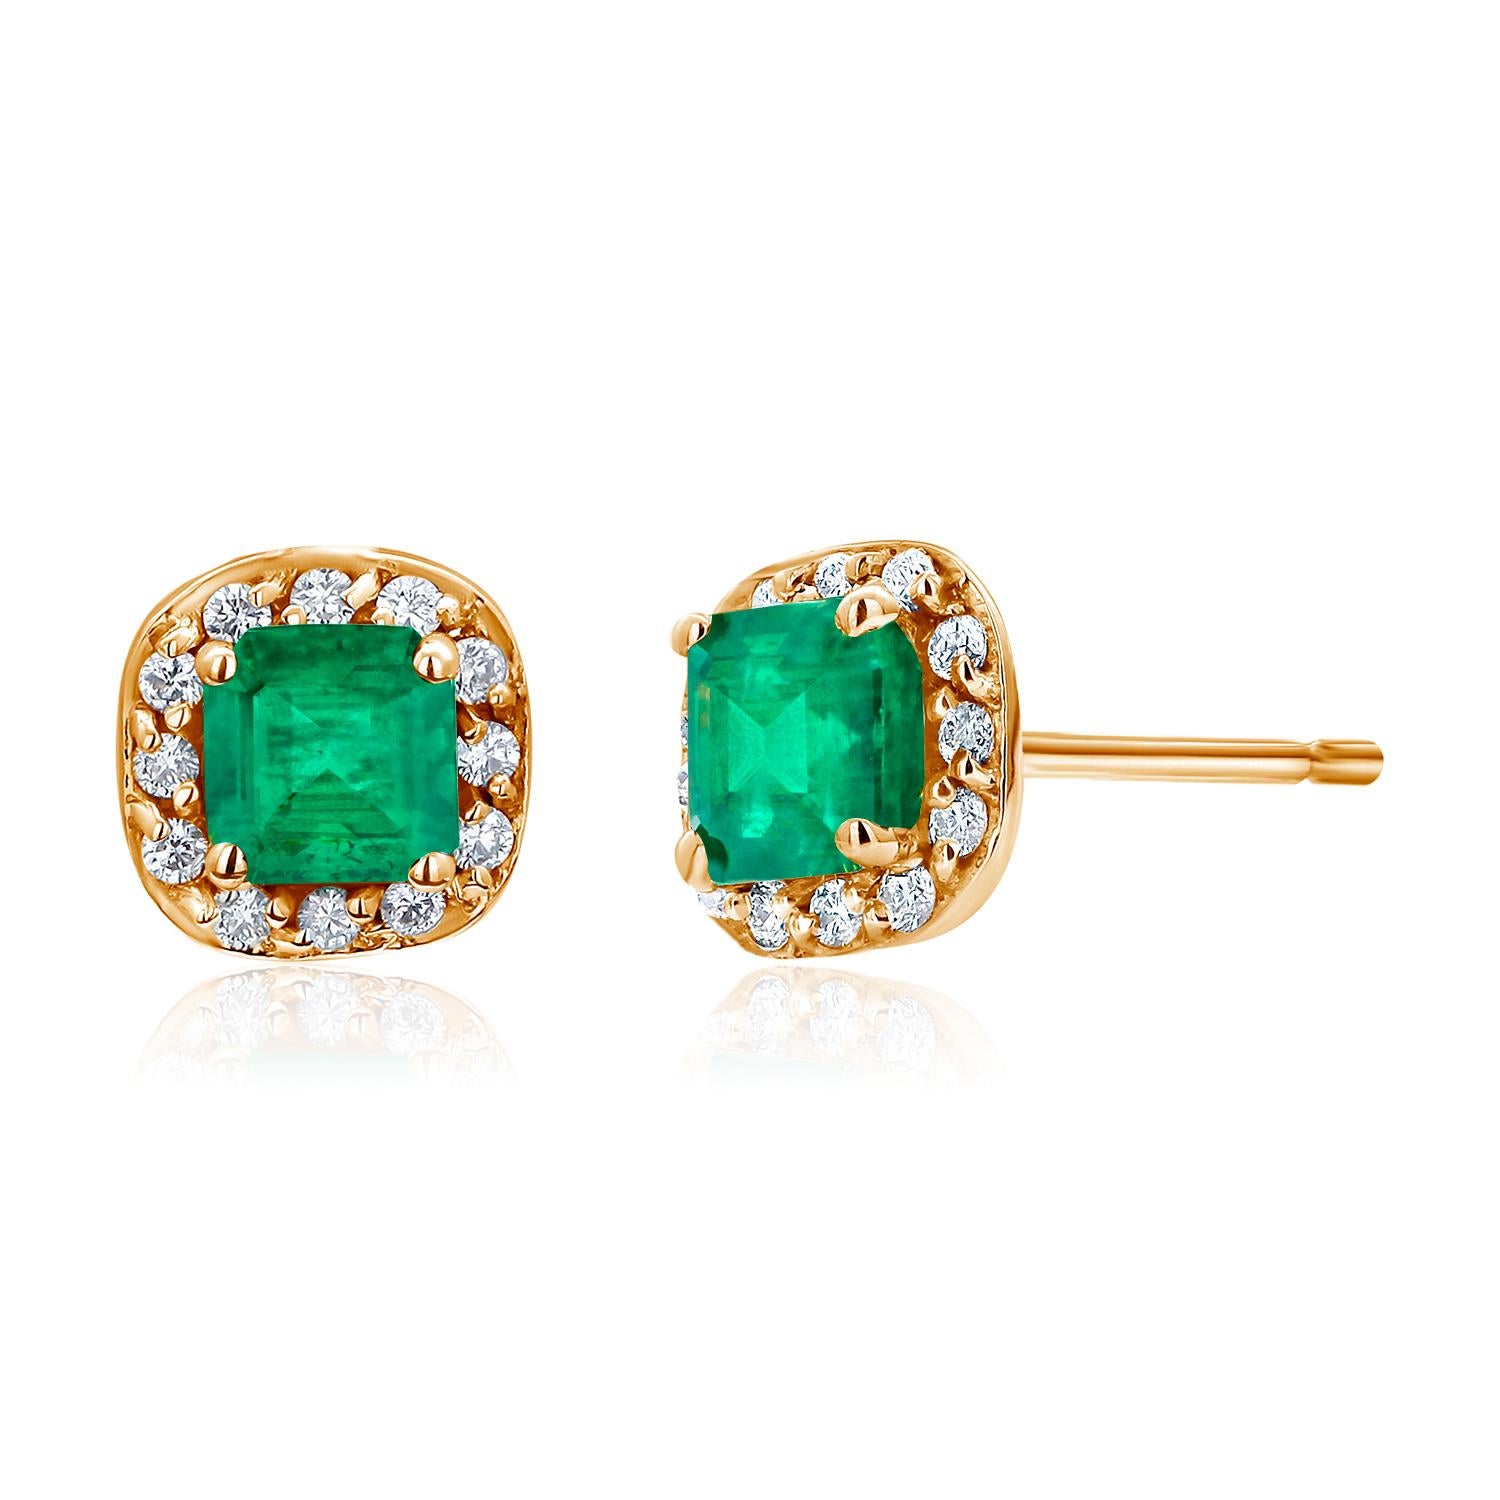 Contemporary Emerald and Diamond Yellow Gold Square Shaped Stud Earrings